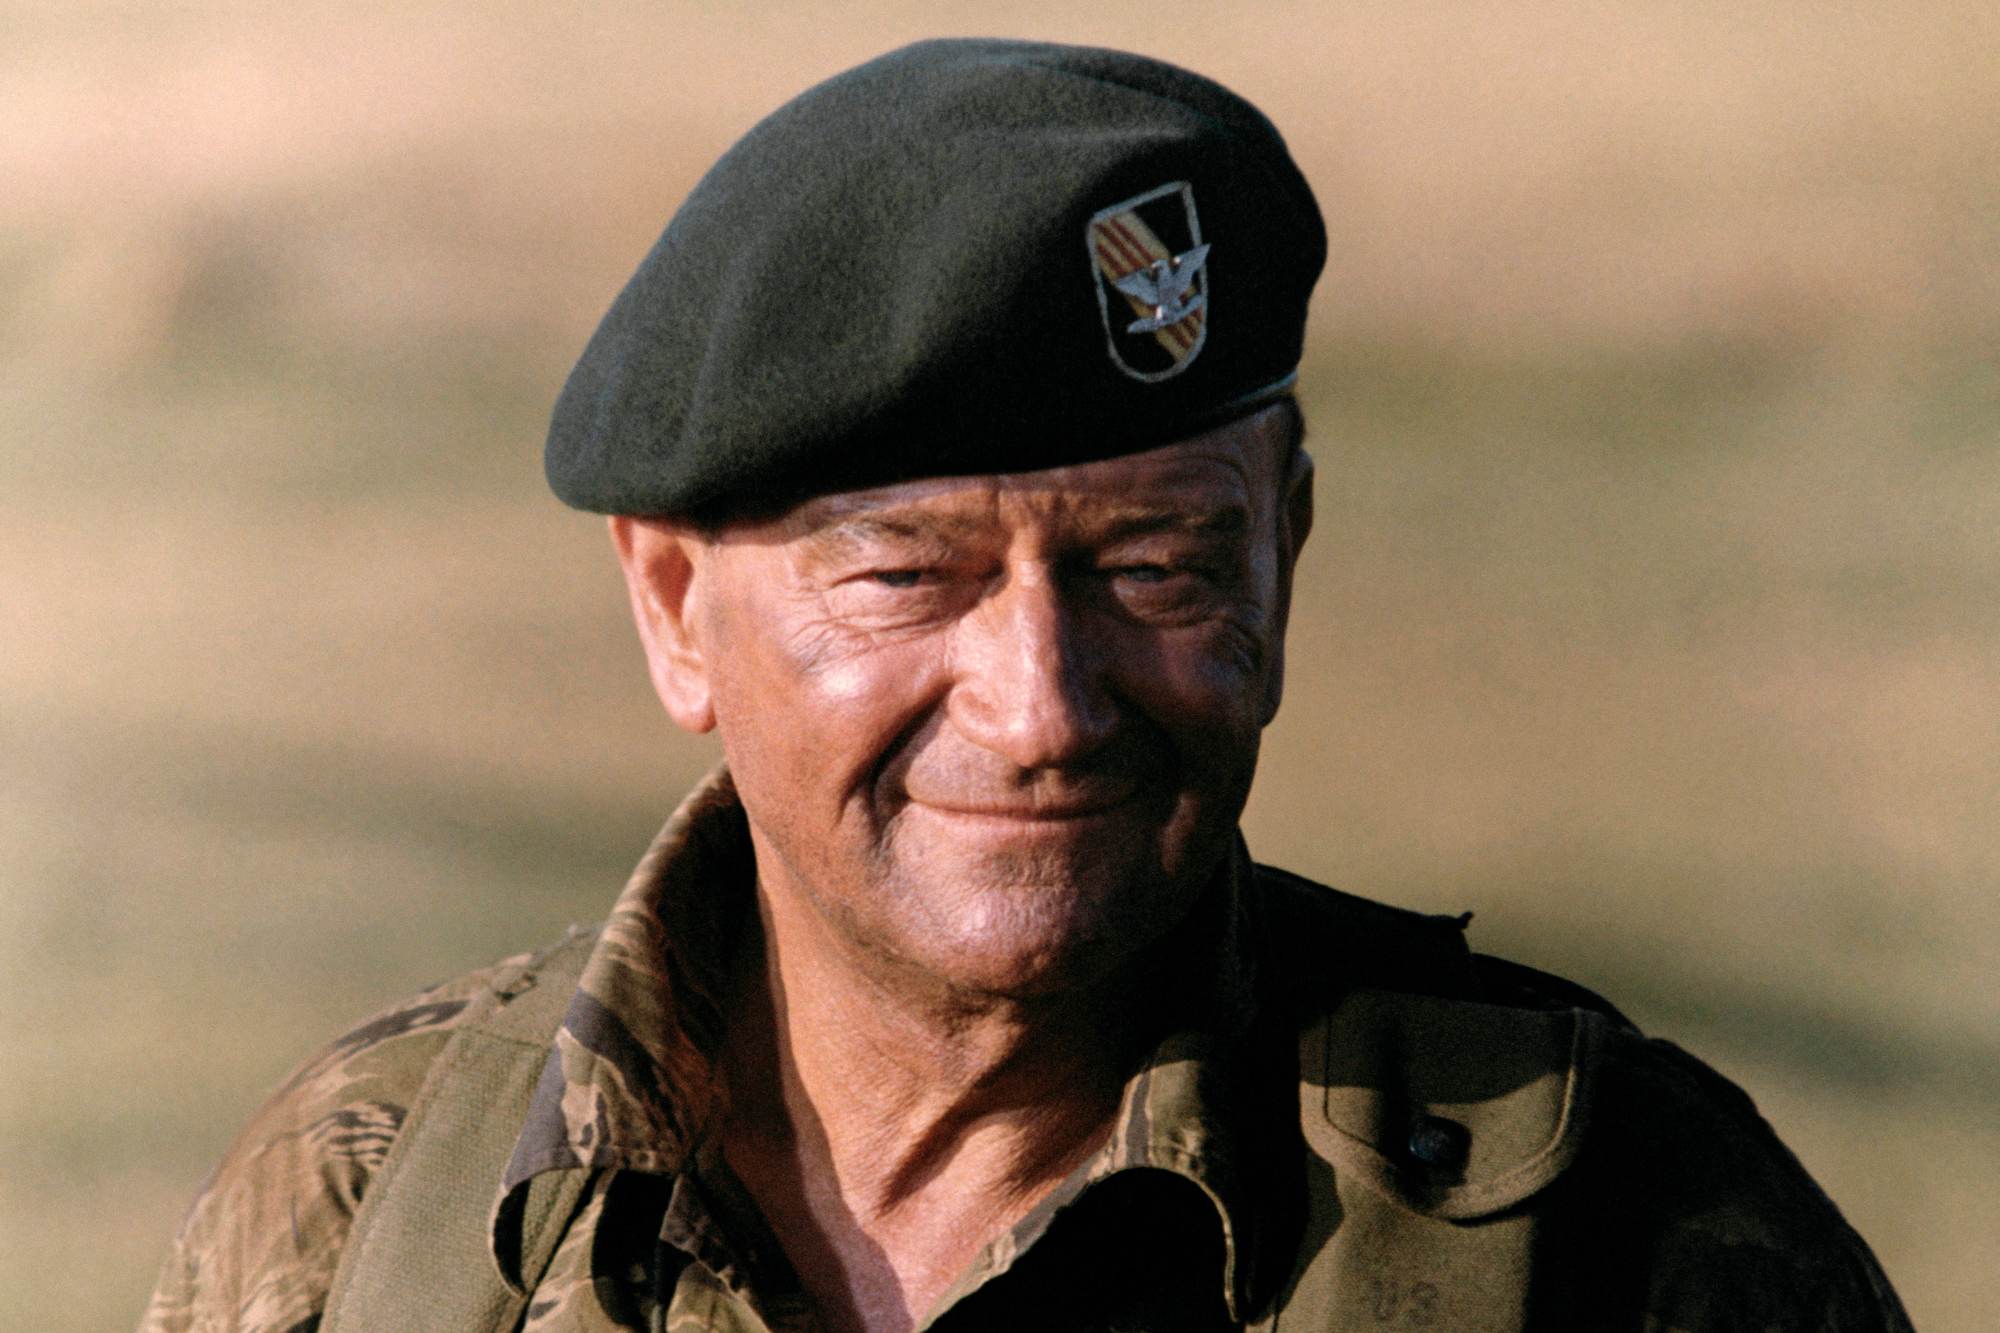 'The Green Berets' John Wayne as Col. Mike Kirby with a slight smile on his face, wearing a beret uniform